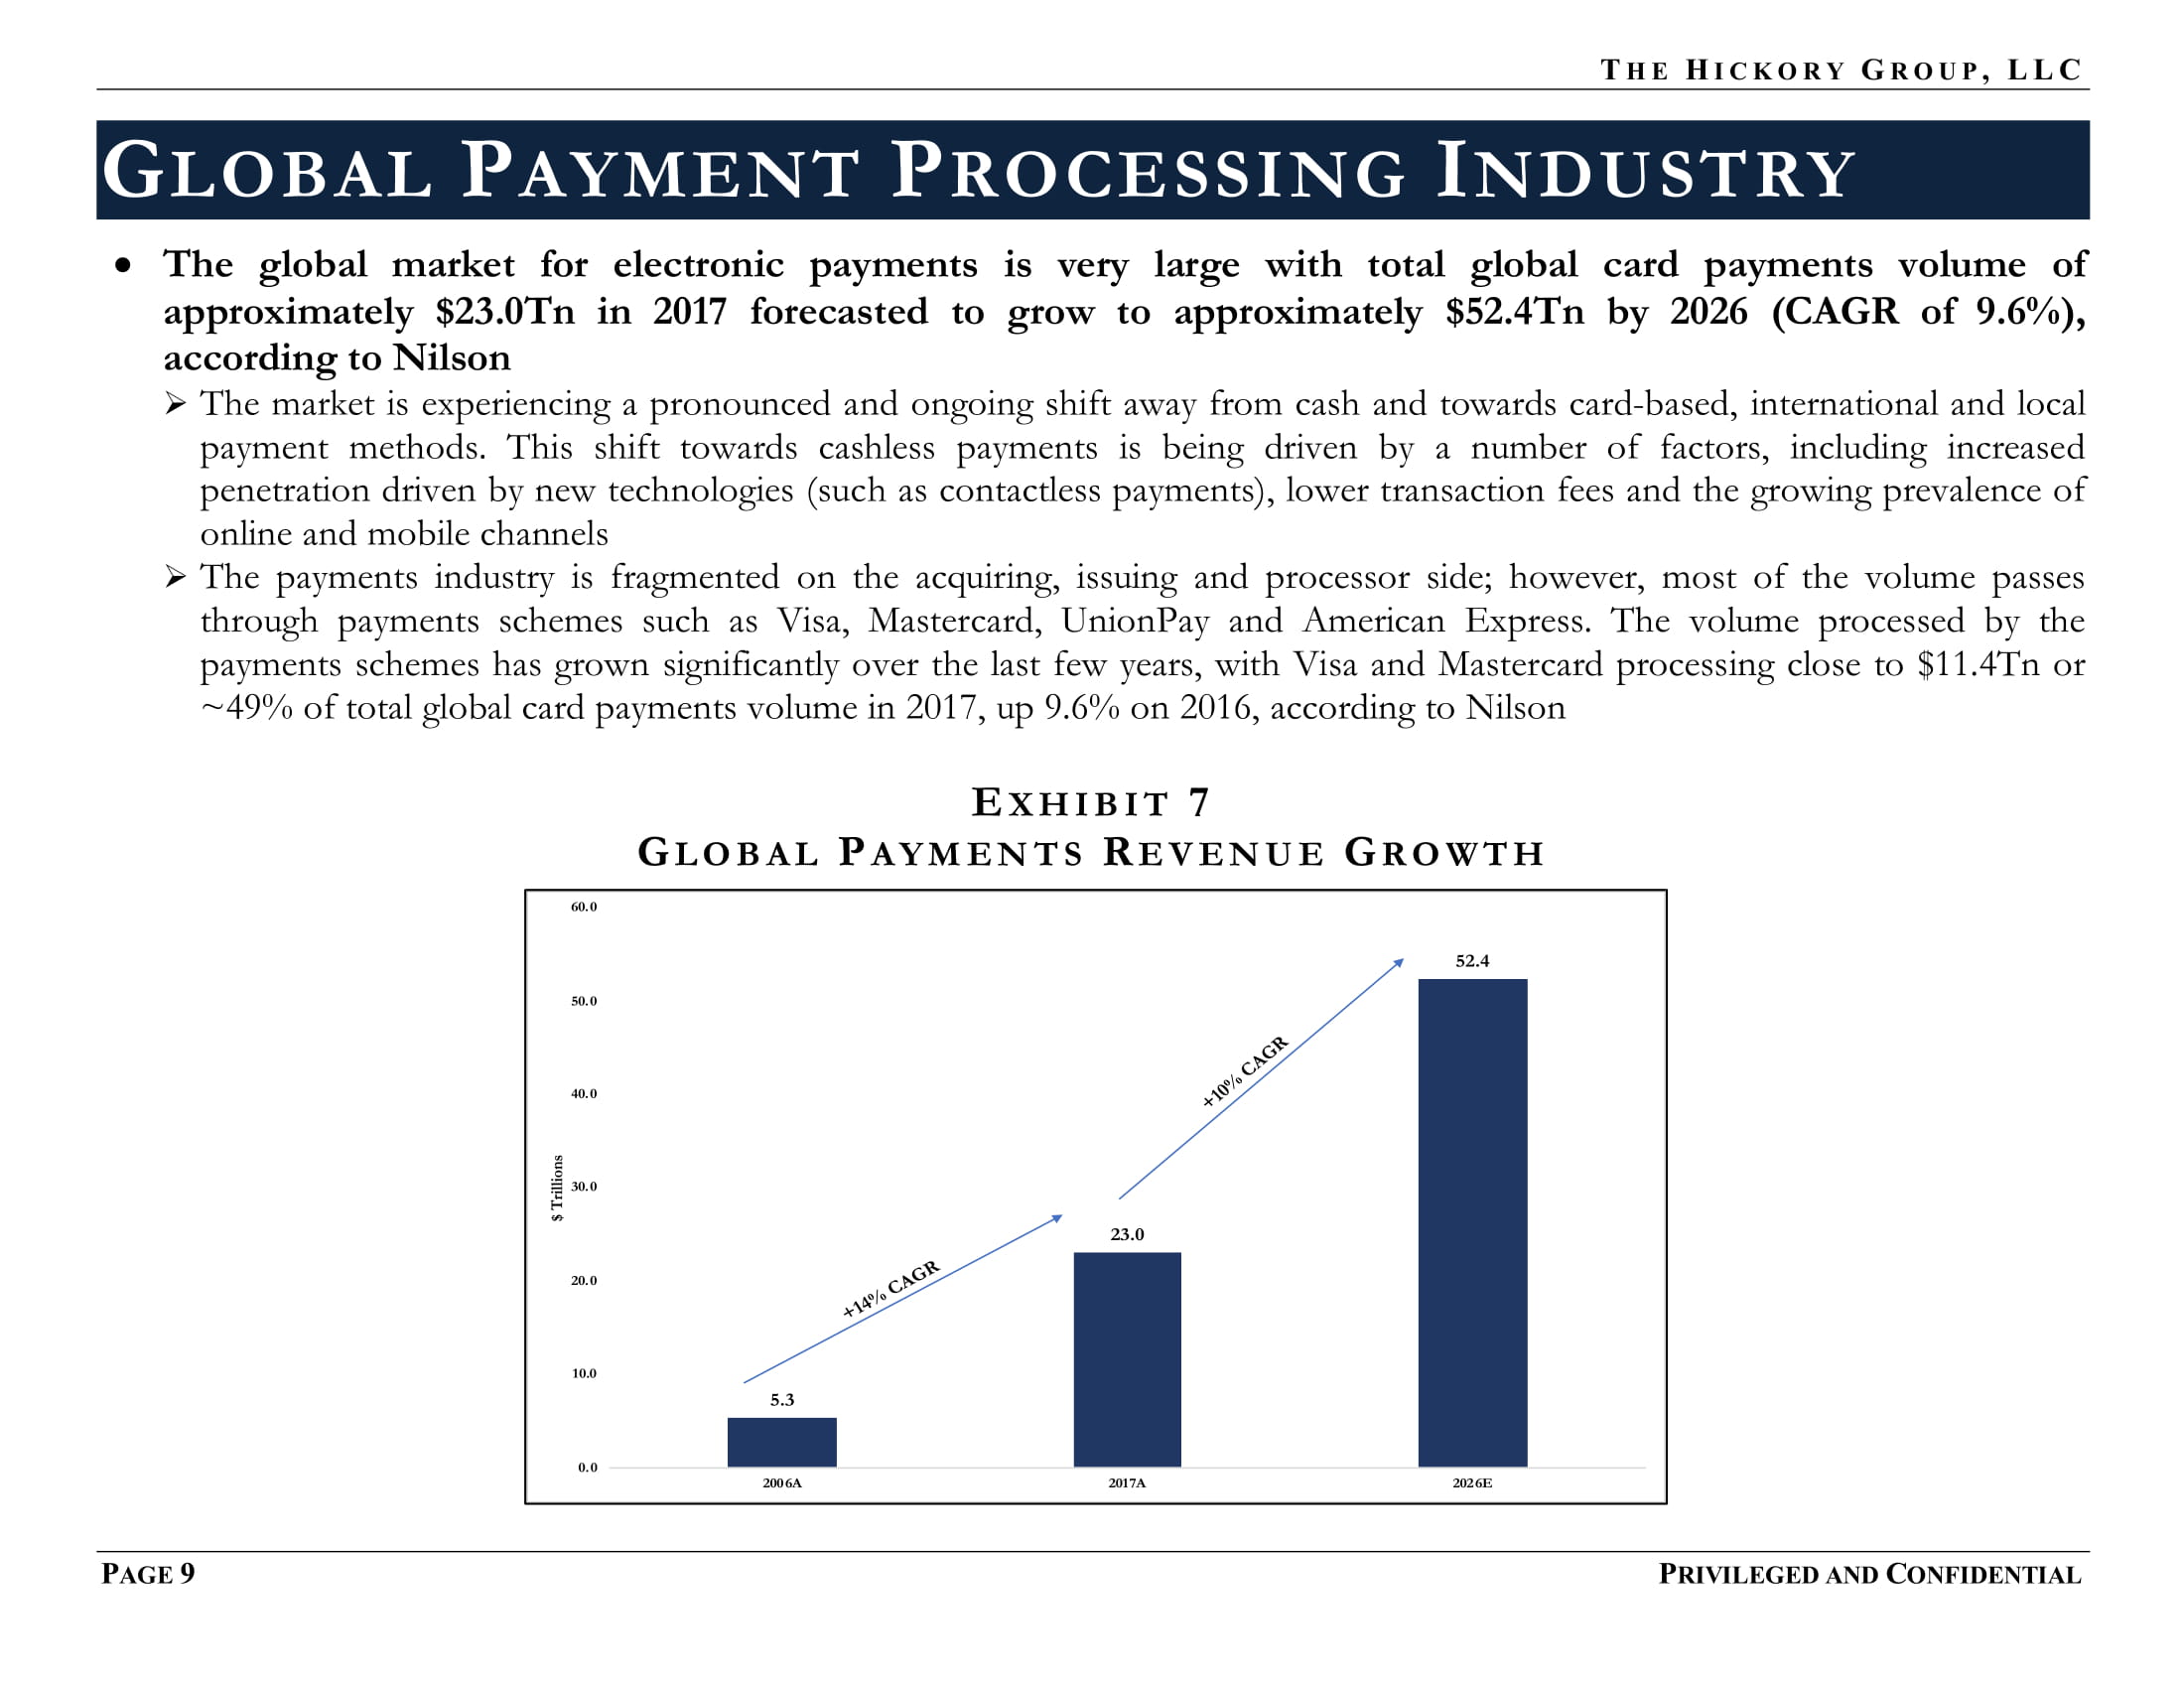 FINAL_THG FinTech Industry - Payment Processing Sector Flash Report (27 March 2019) Privileged & Confidential-15.jpg